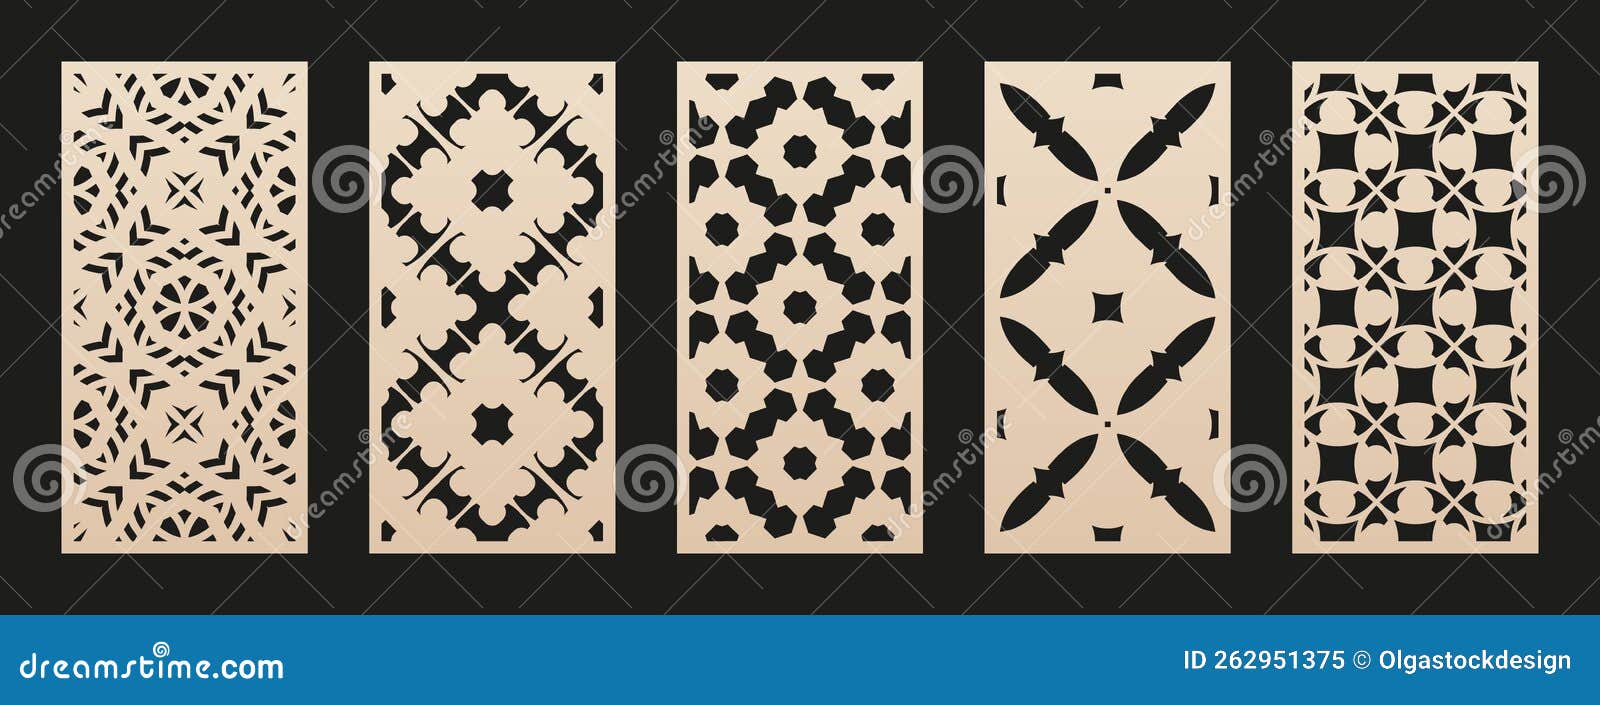 Laser Cut Patterns. Vector Set of Floral Geometric Ornaments. Moroccan ...